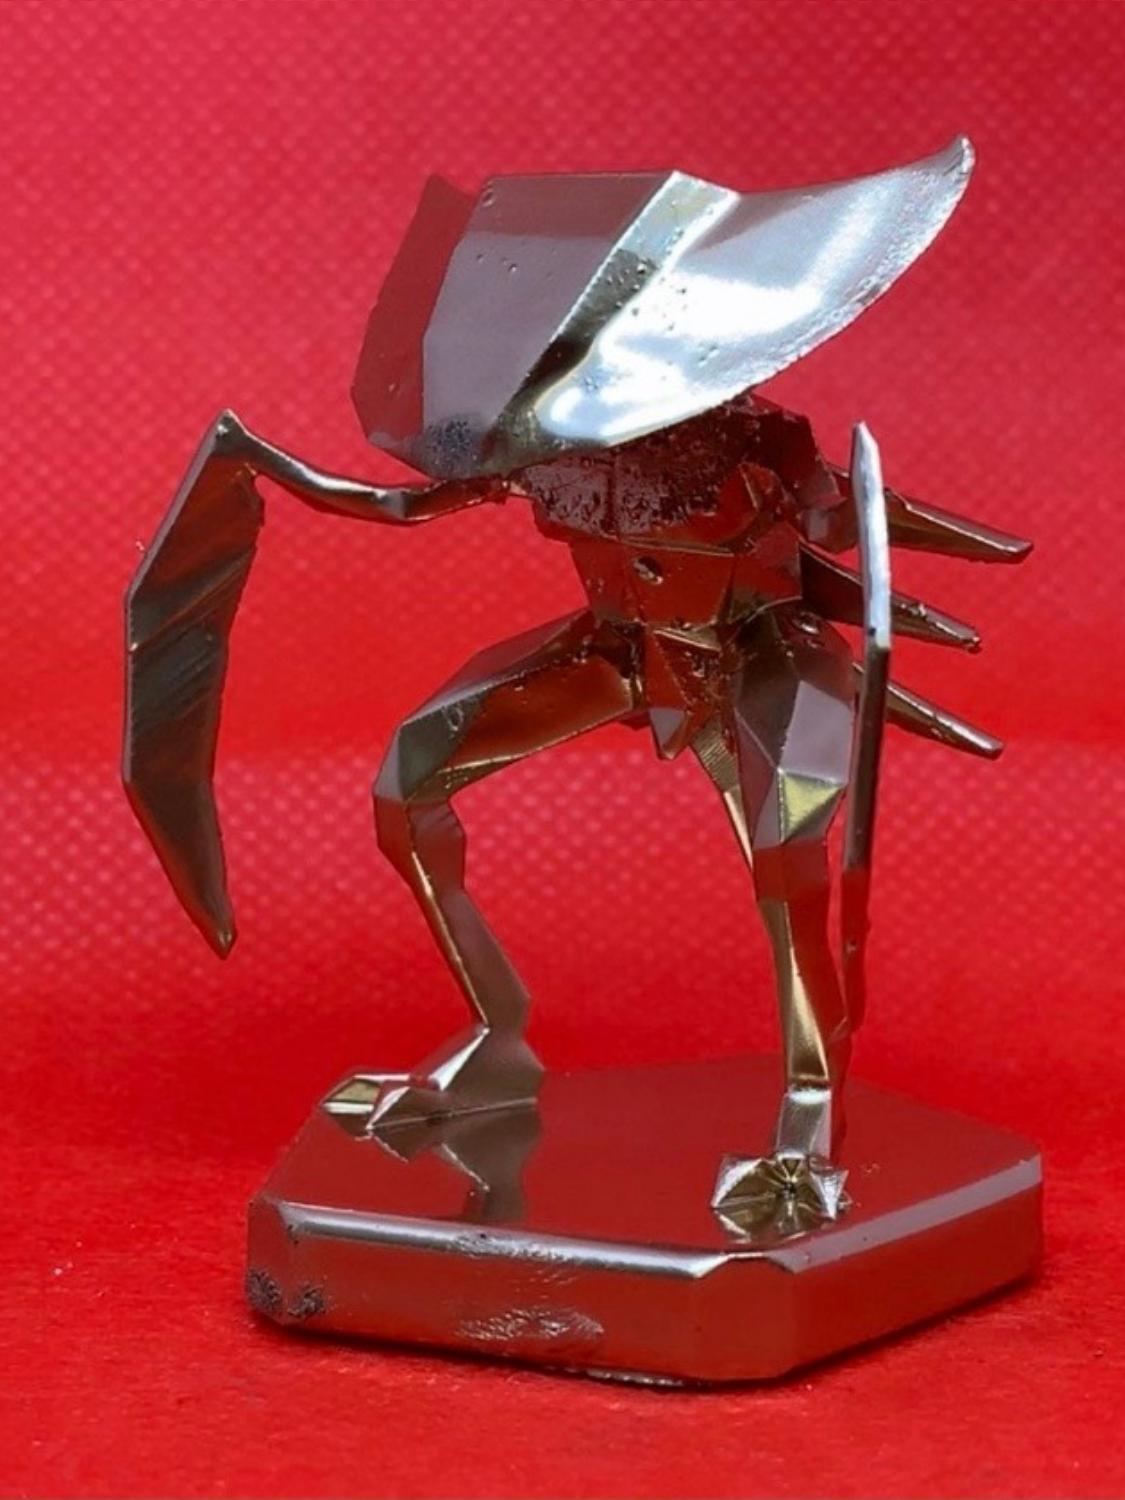 A shiny golden Kabutops figurine on a base, with a red backdrop.